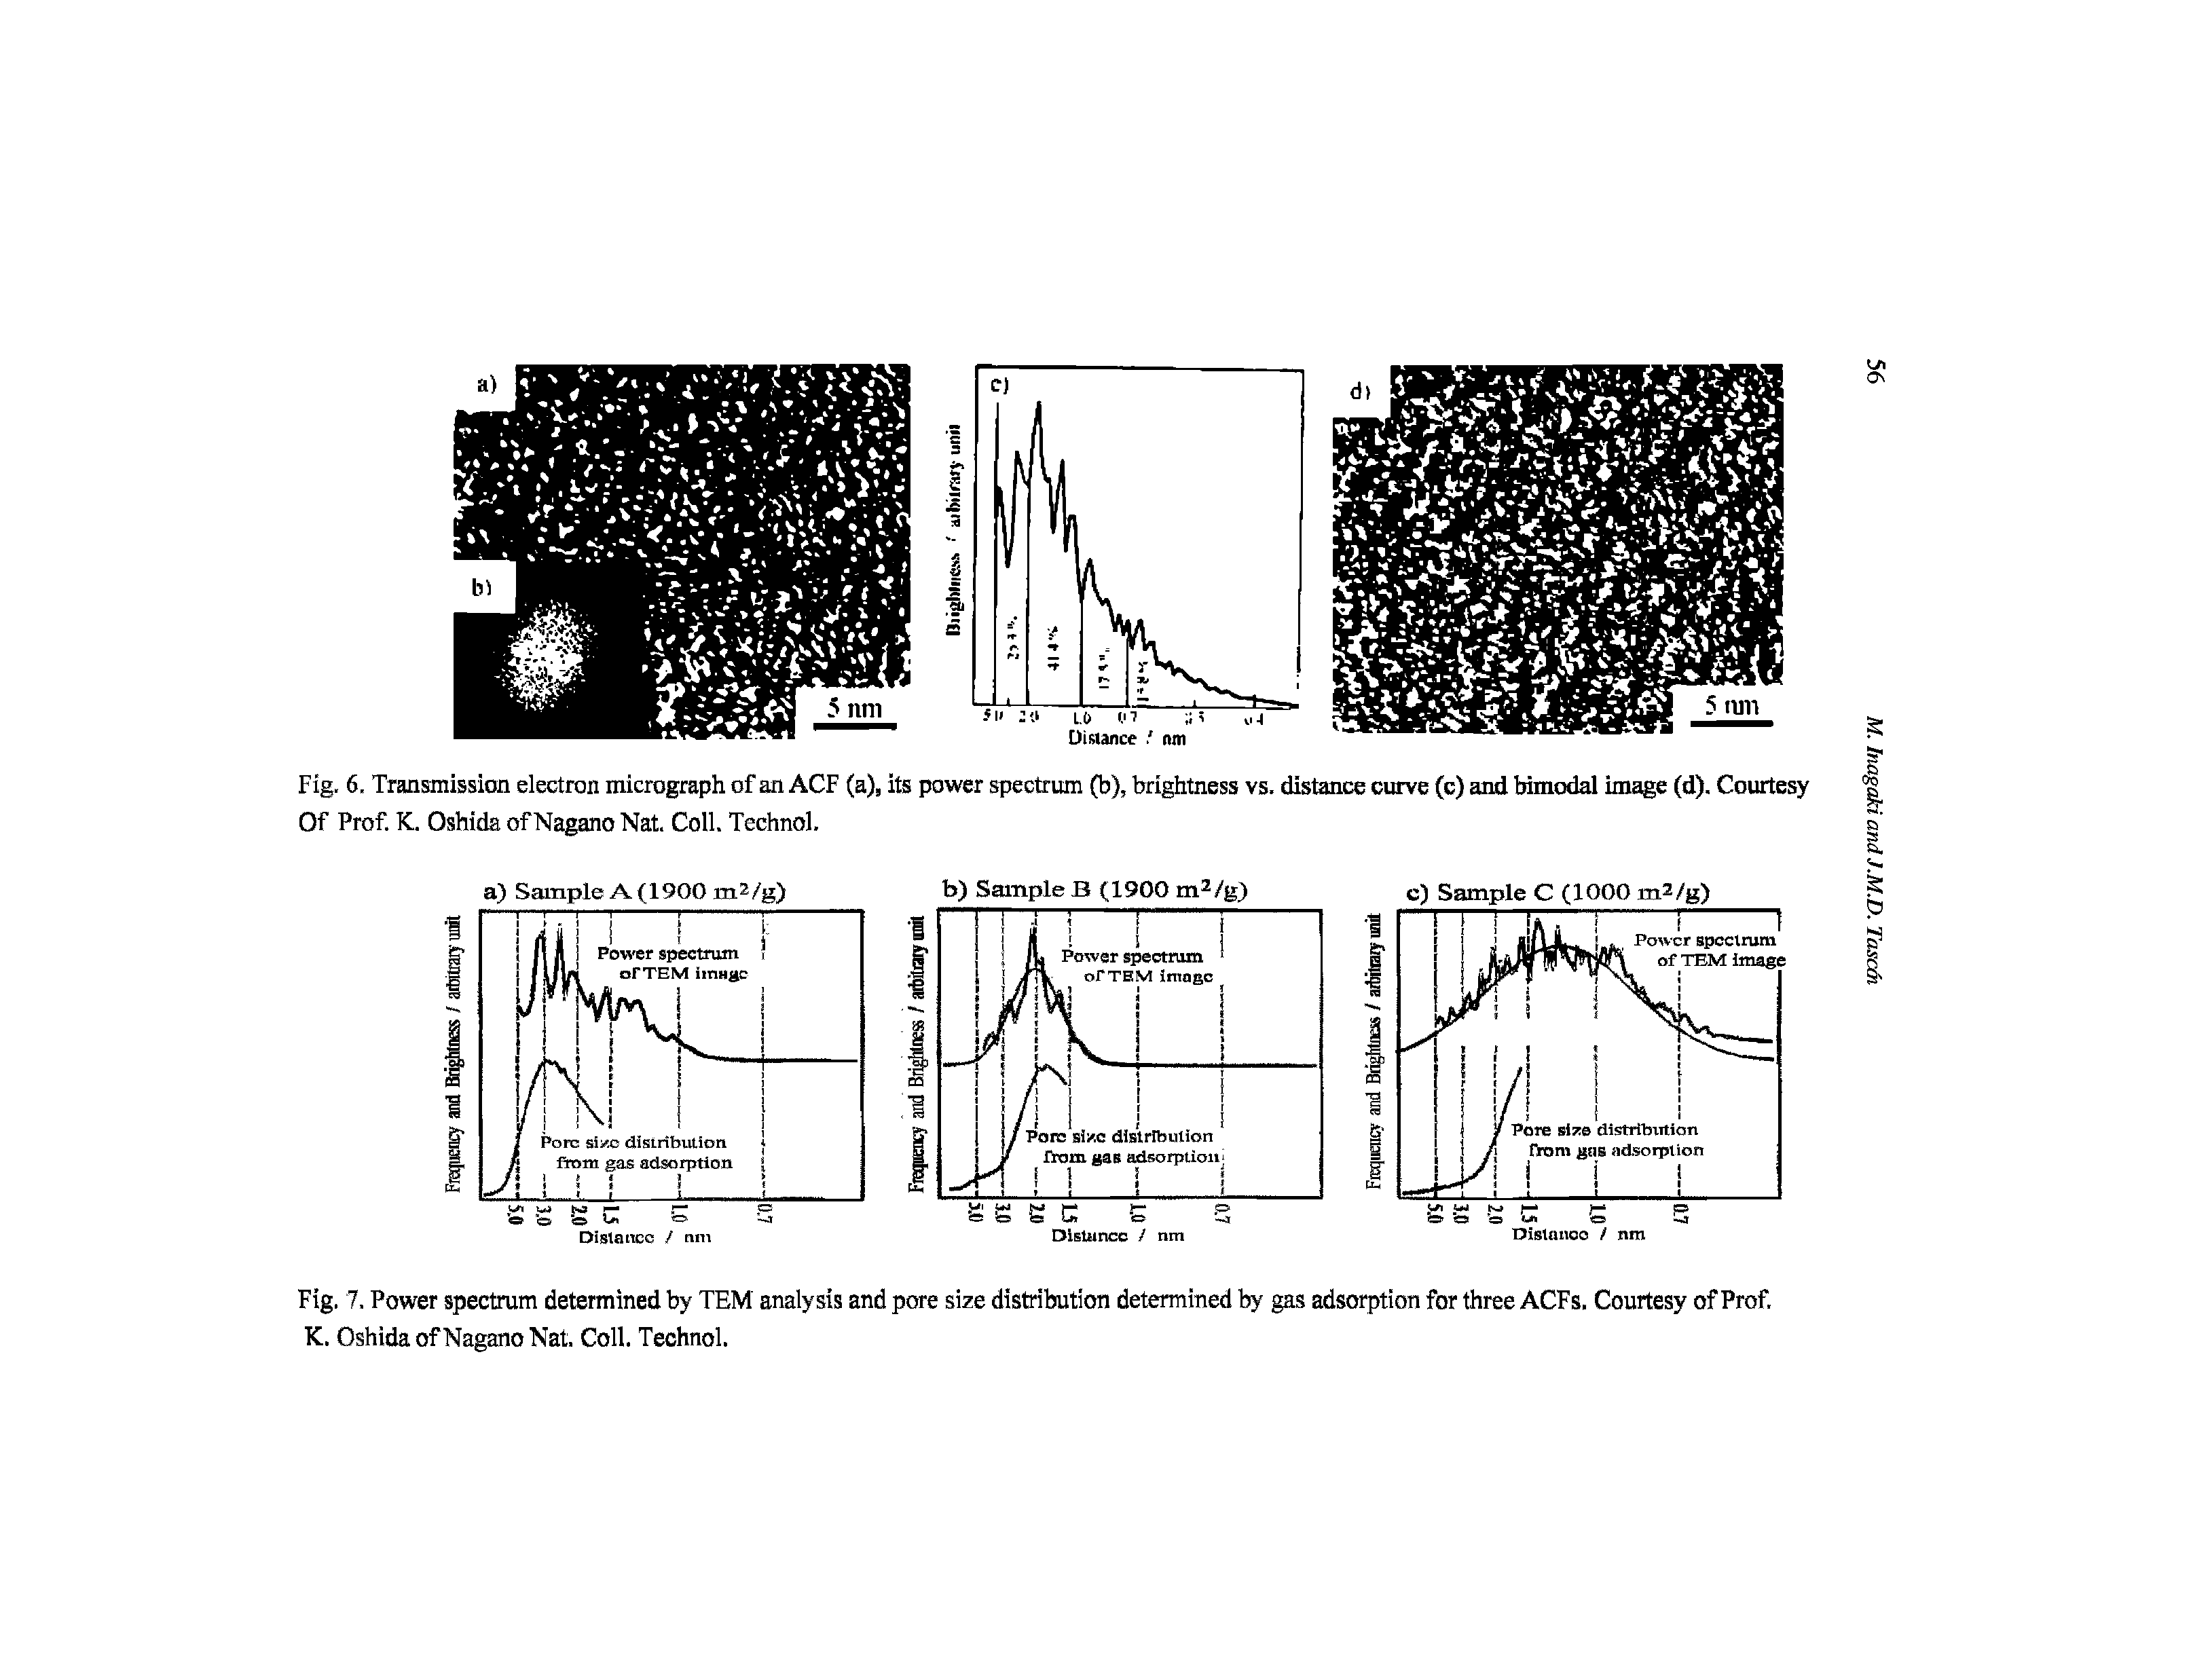 Fig. 7. Power spectrum determined by TEM analysis and pore size distribution determined by gas adsorption for three ACFs. Courtesy of Prof K. Oshida of Nagano Nat, Coll. Technol.